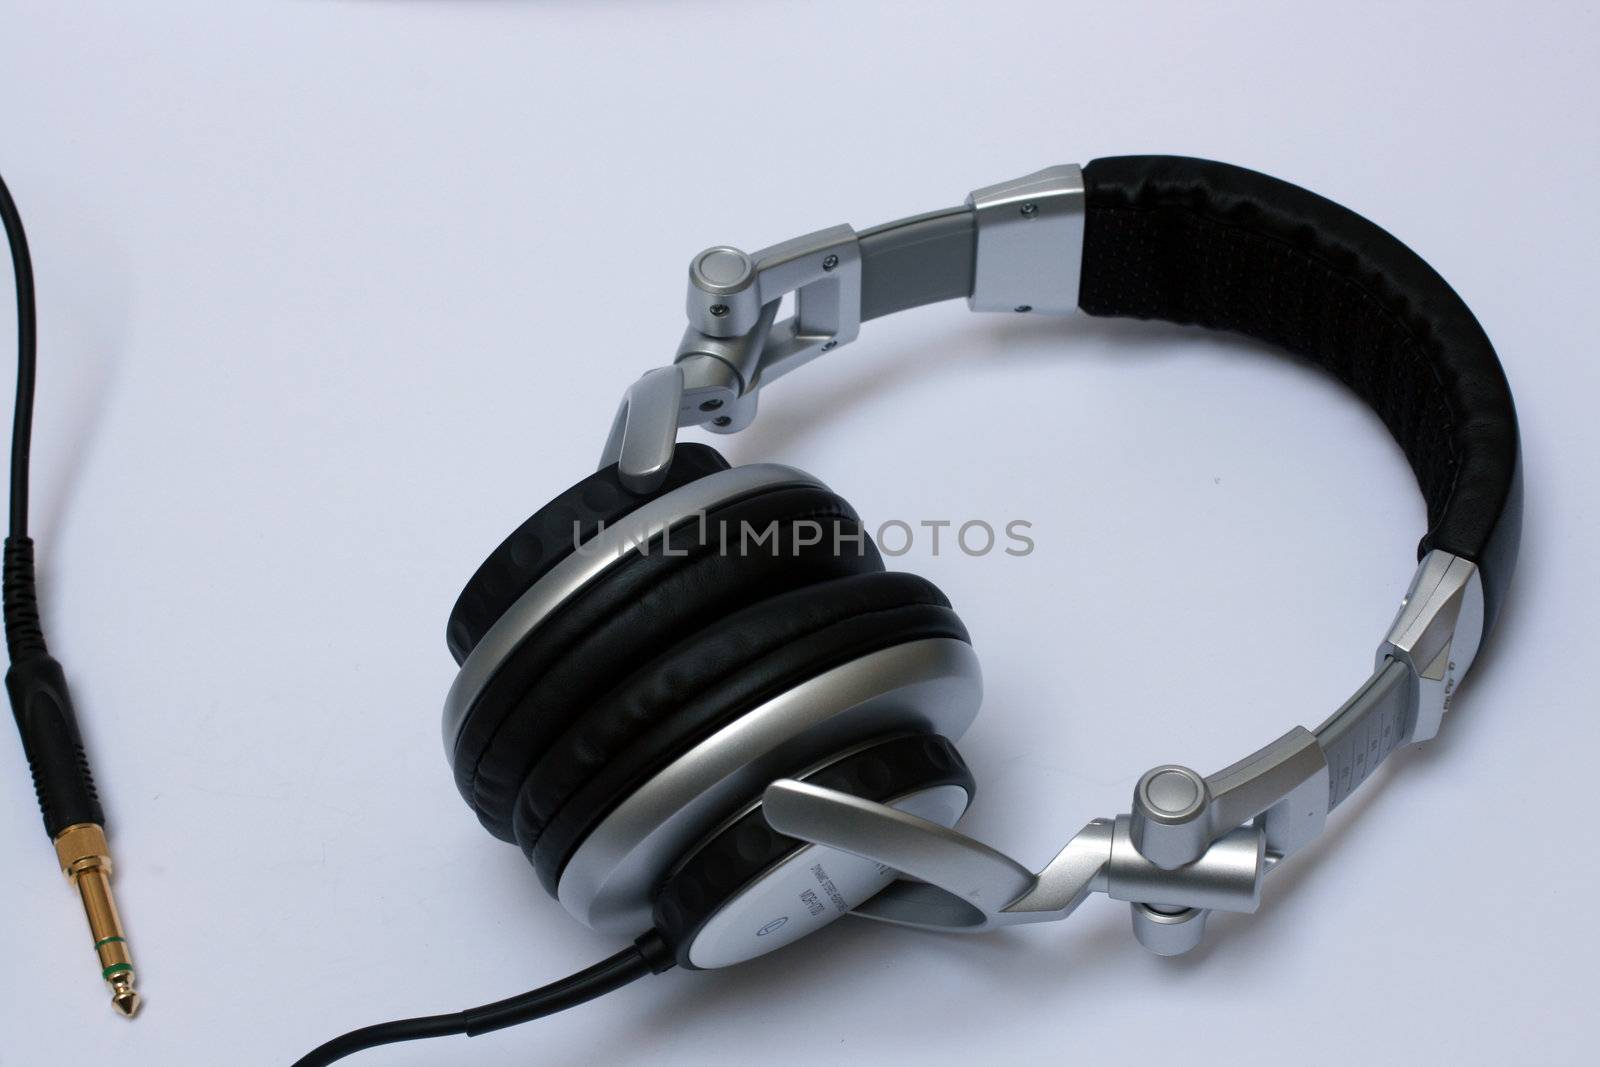 a pair of DJ Headphones with cord